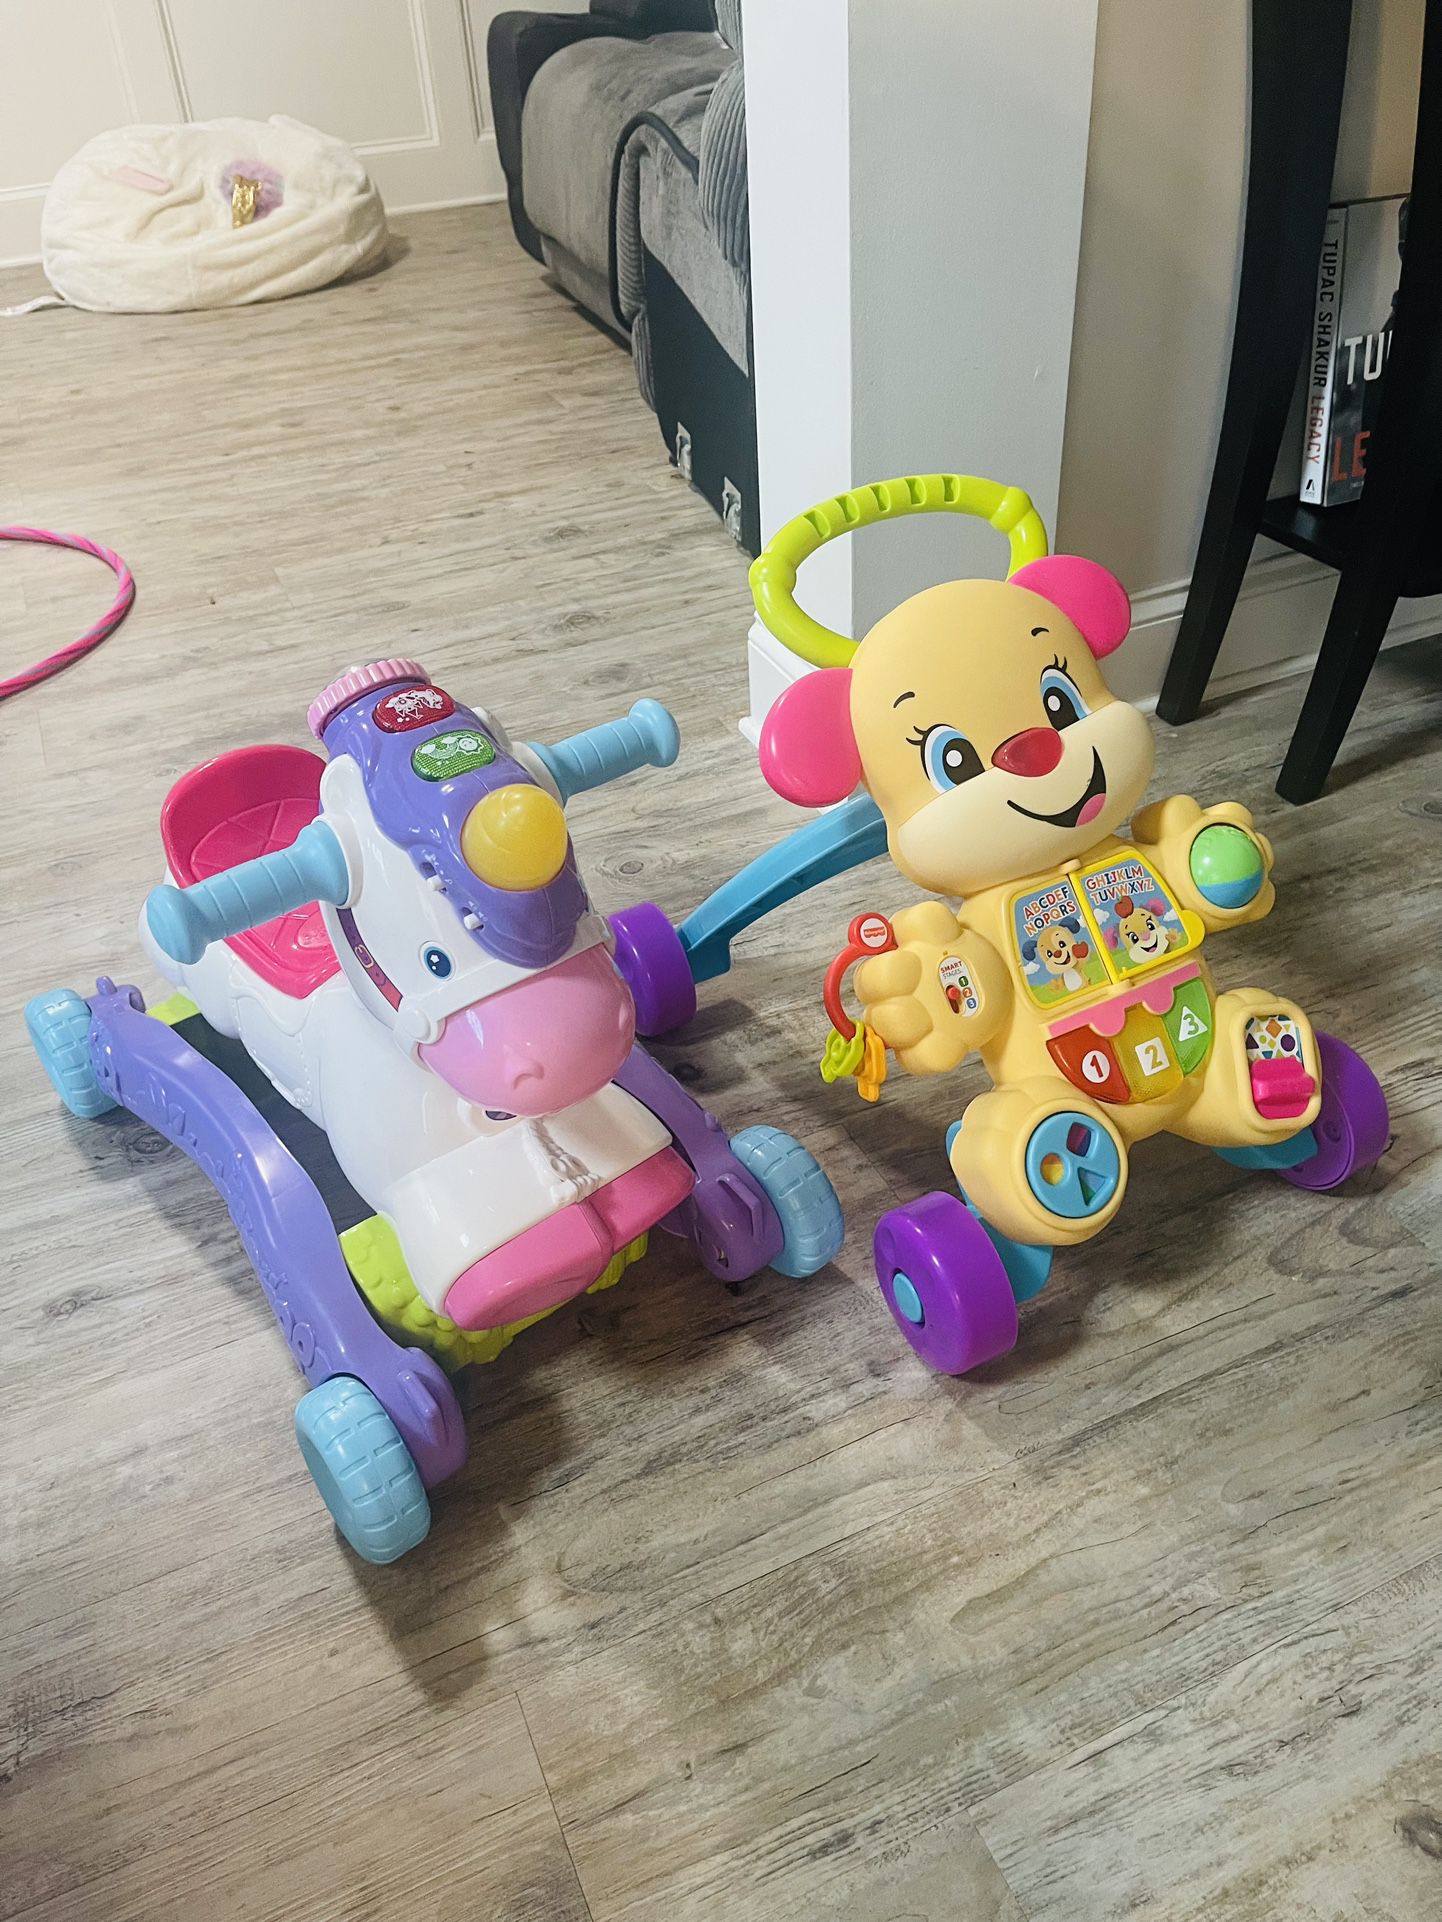 FREE KIDS TOYS 🧸 MUST PICK UP